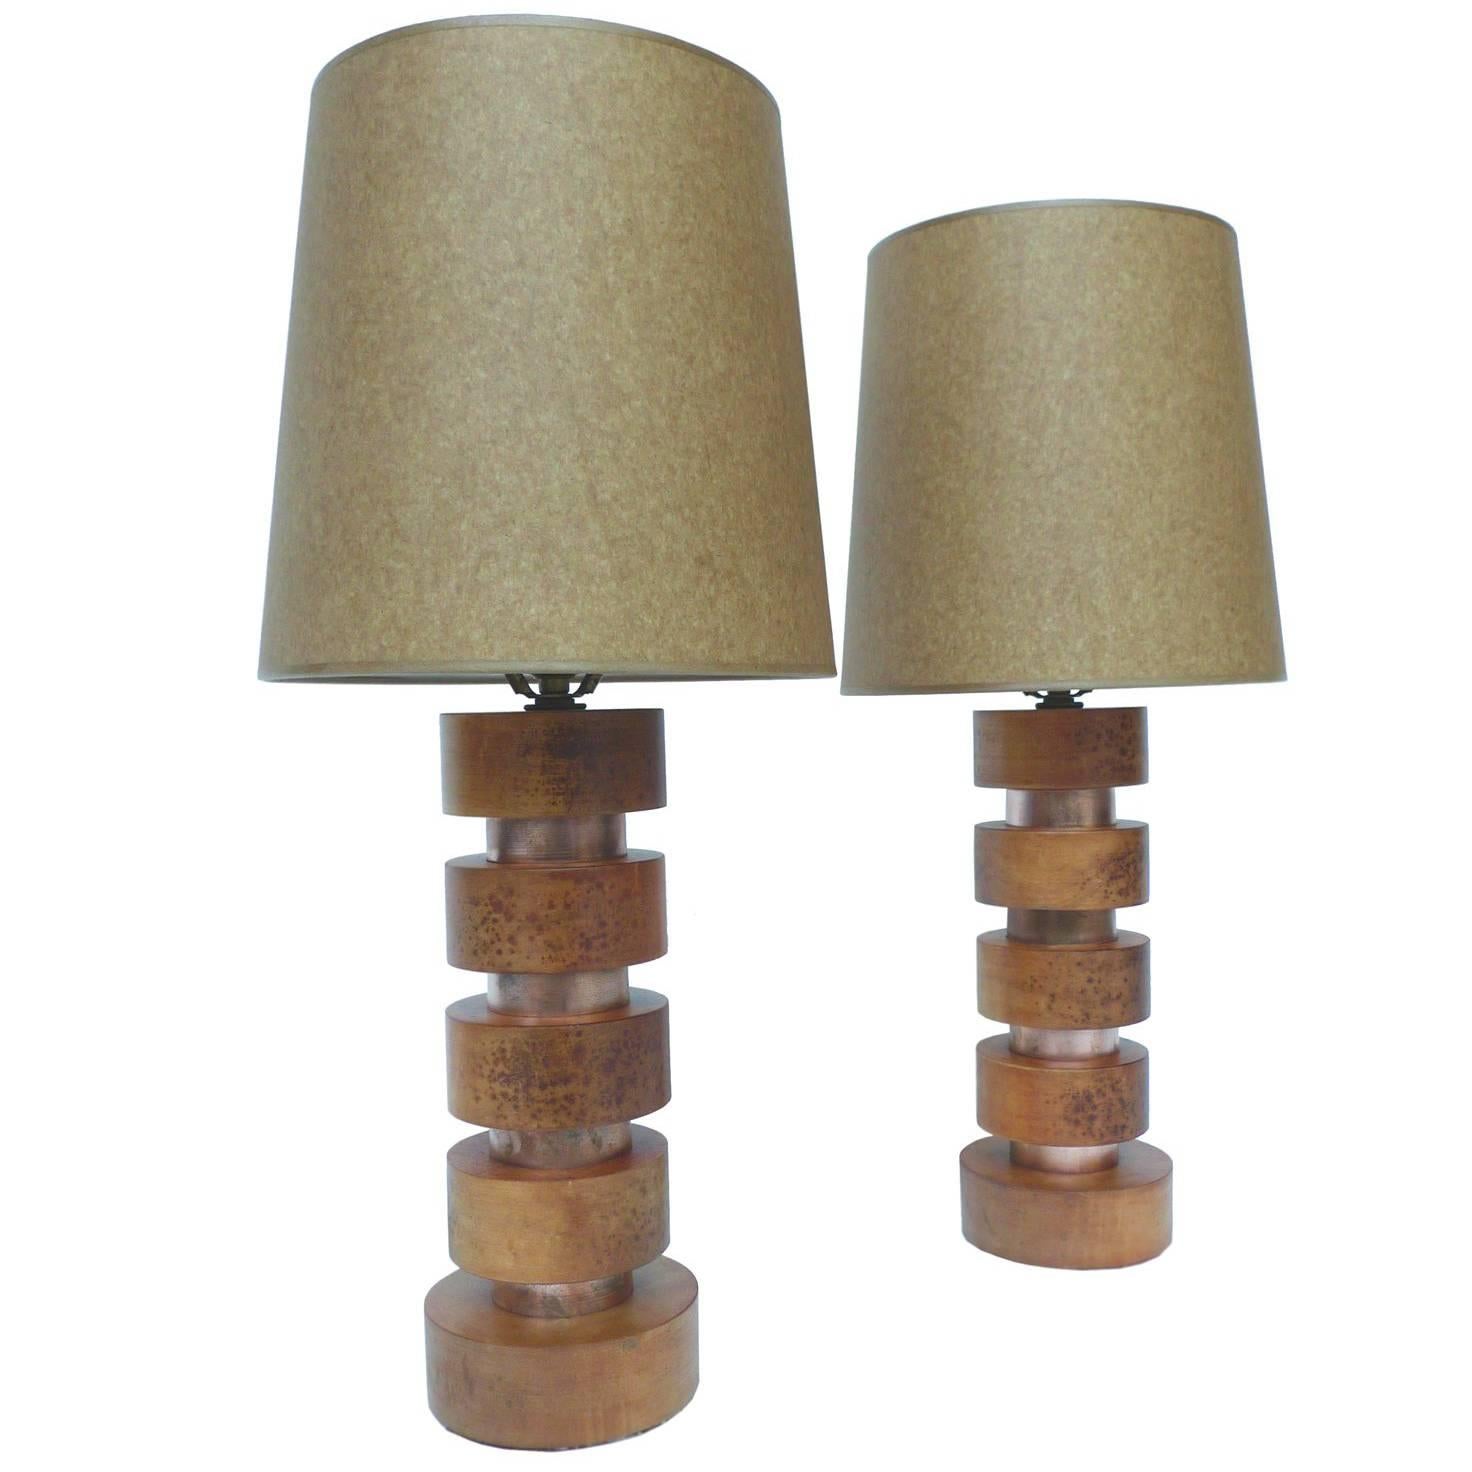 Pair of Midcentury Table Lamps in the Style of Paul Frankl